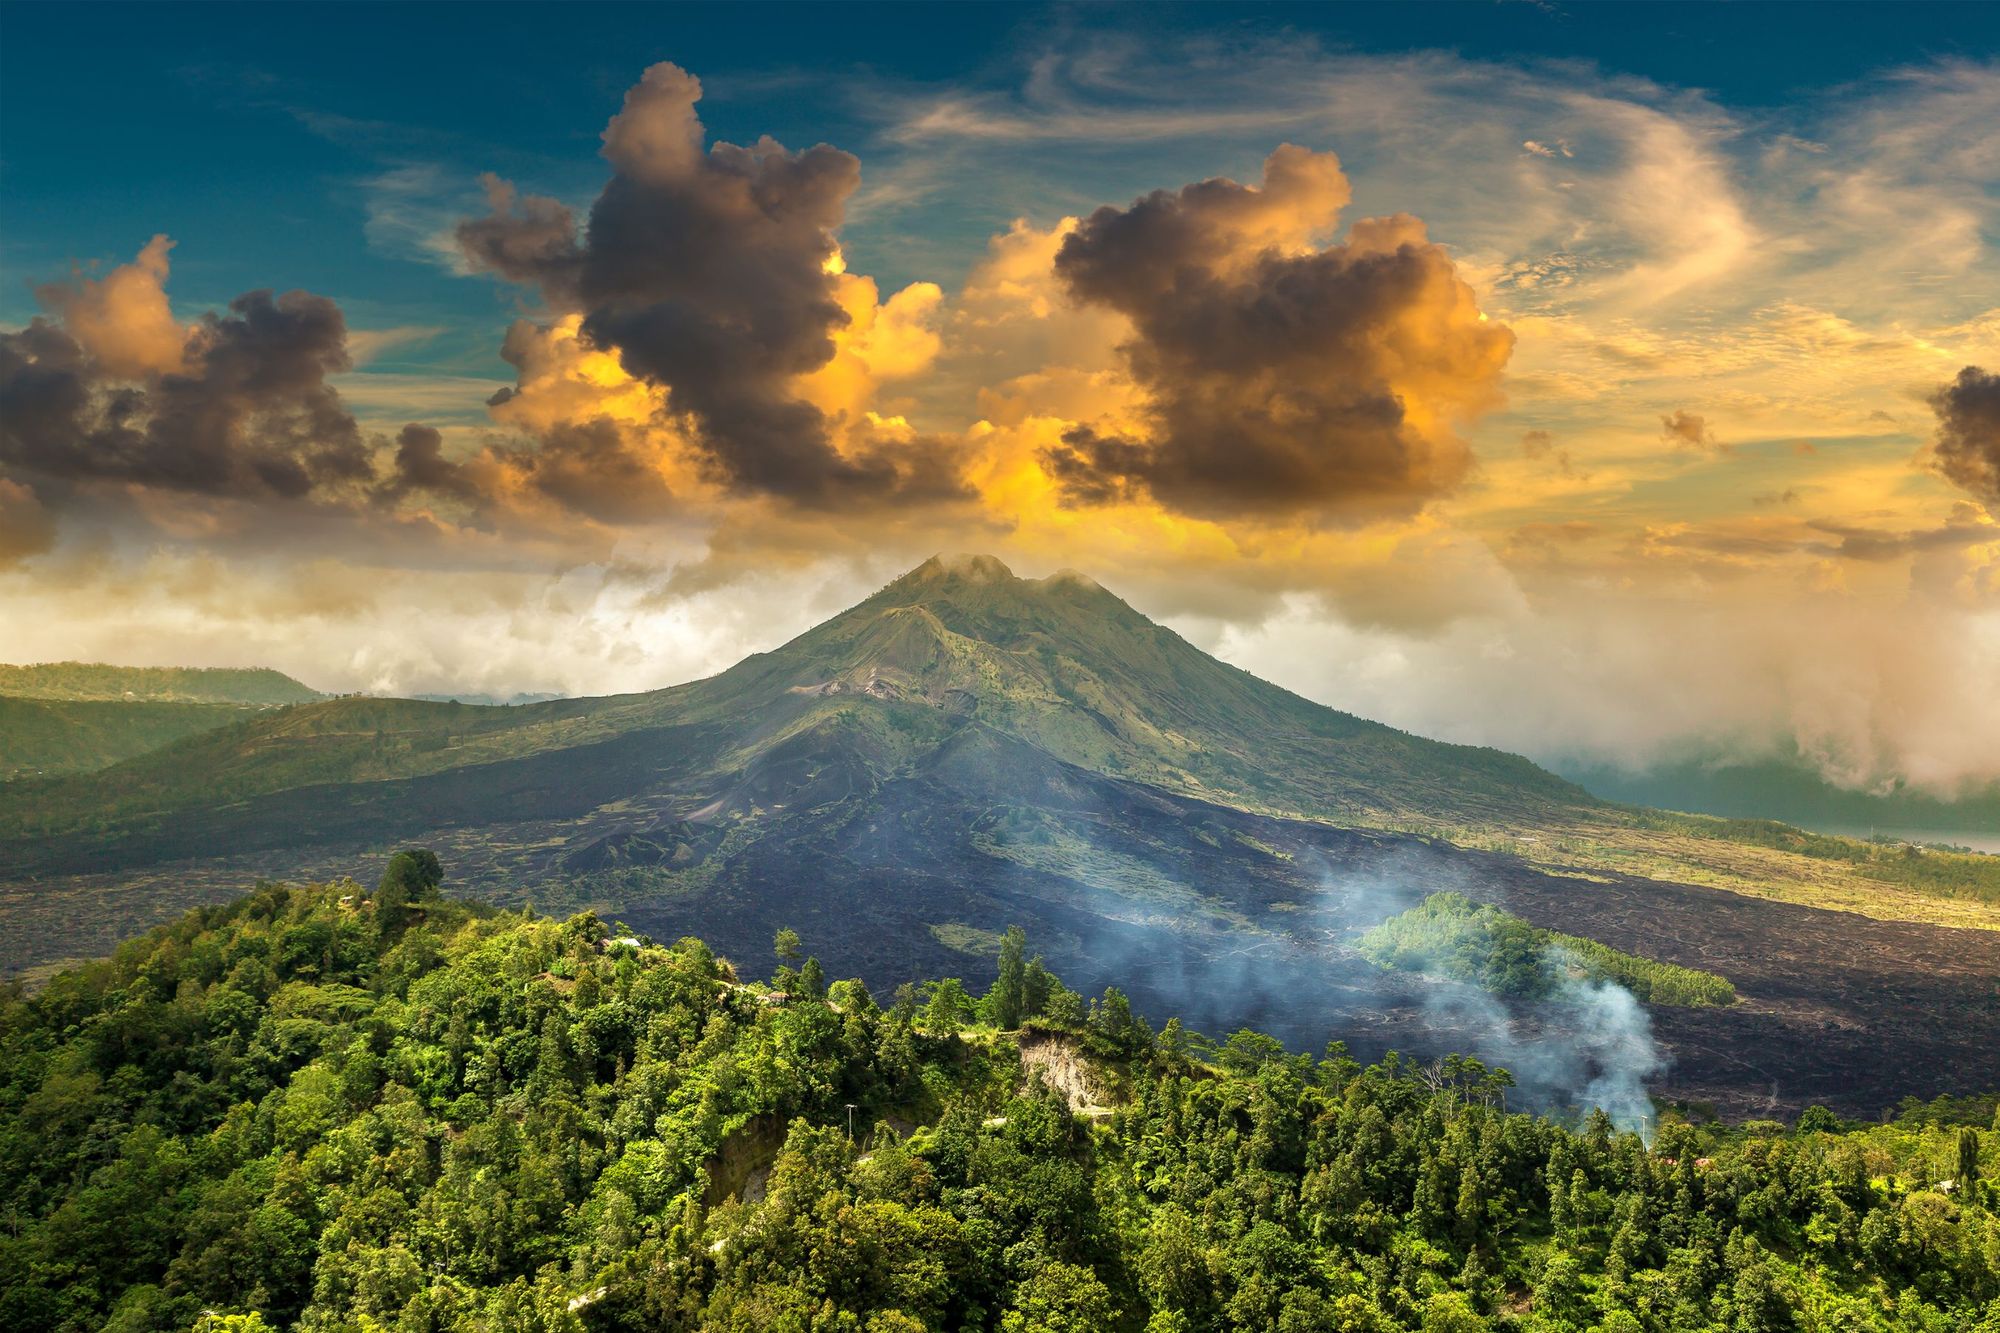 What To Do in Bali: 8 of the Best Hikes & Adventures on the Indonesian Island